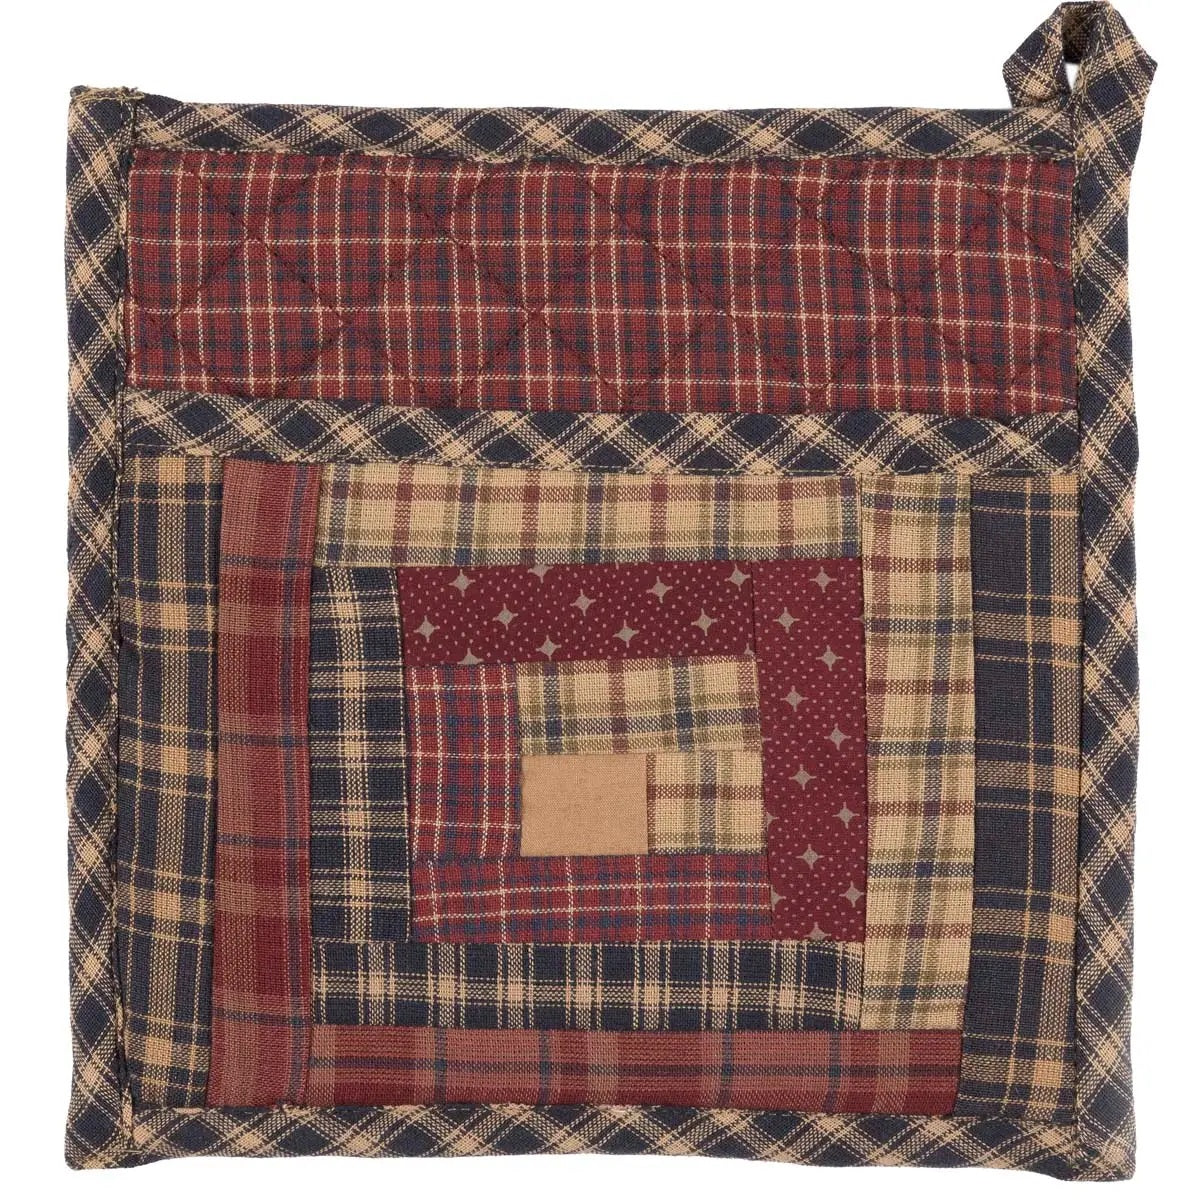 Millsboro Pot Holder Patch with Pocket 8x8 - The Mirrored Past